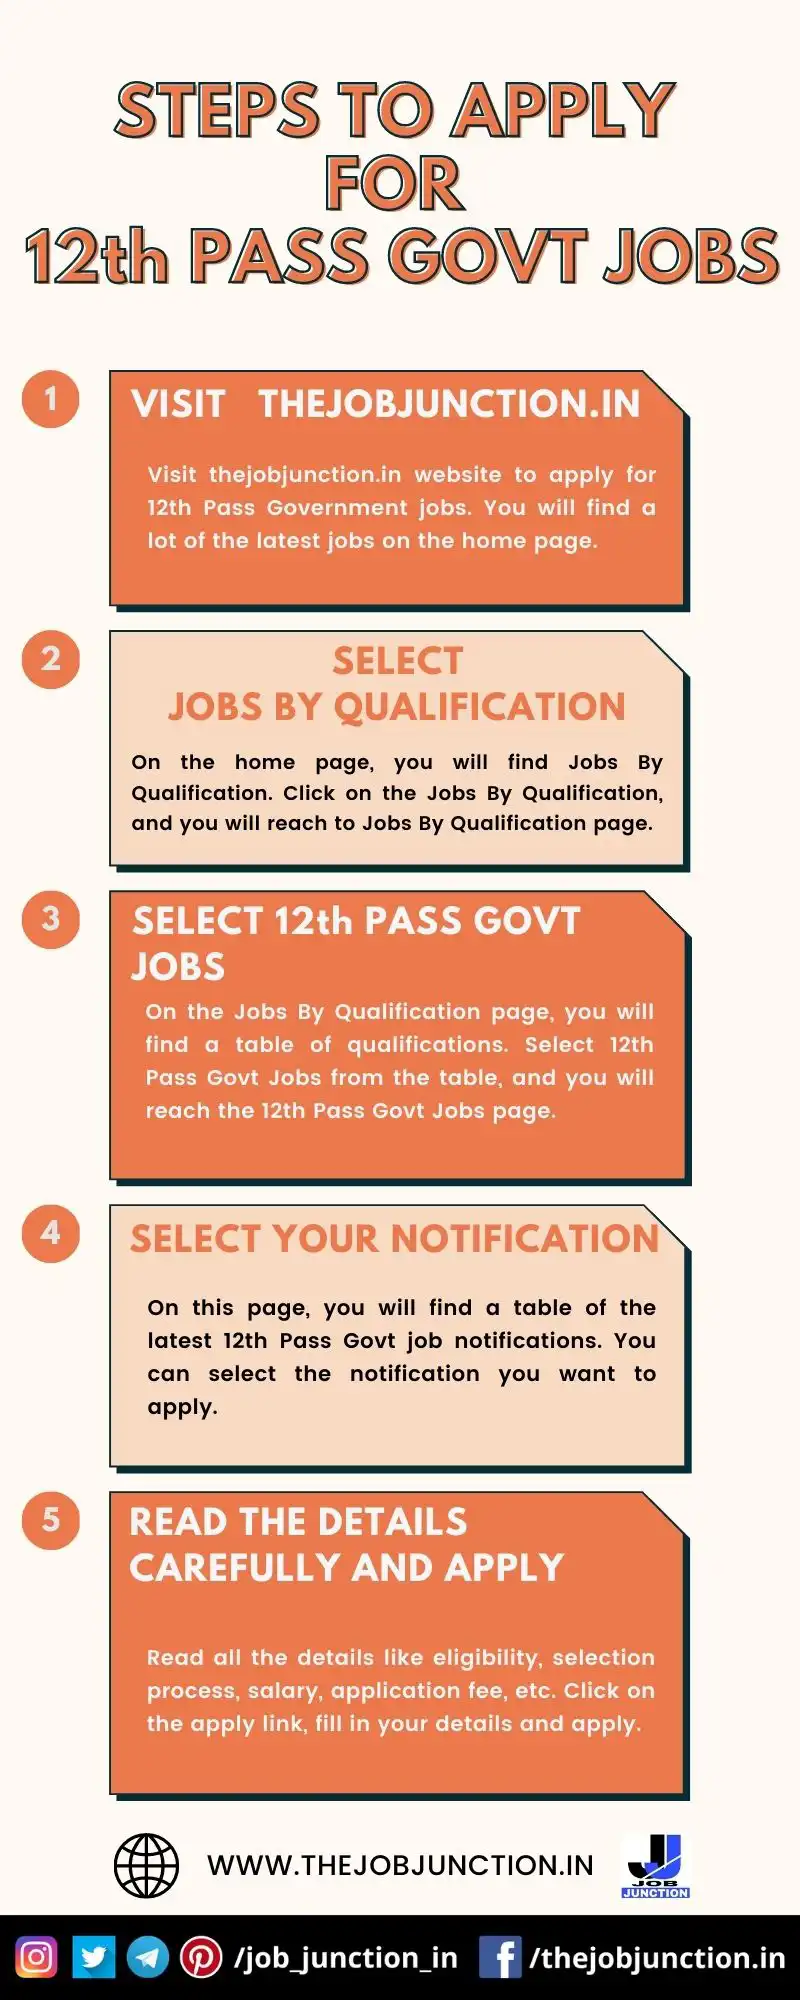 STEPS TO APPLY FOR 12th PASS GOVT JOBS